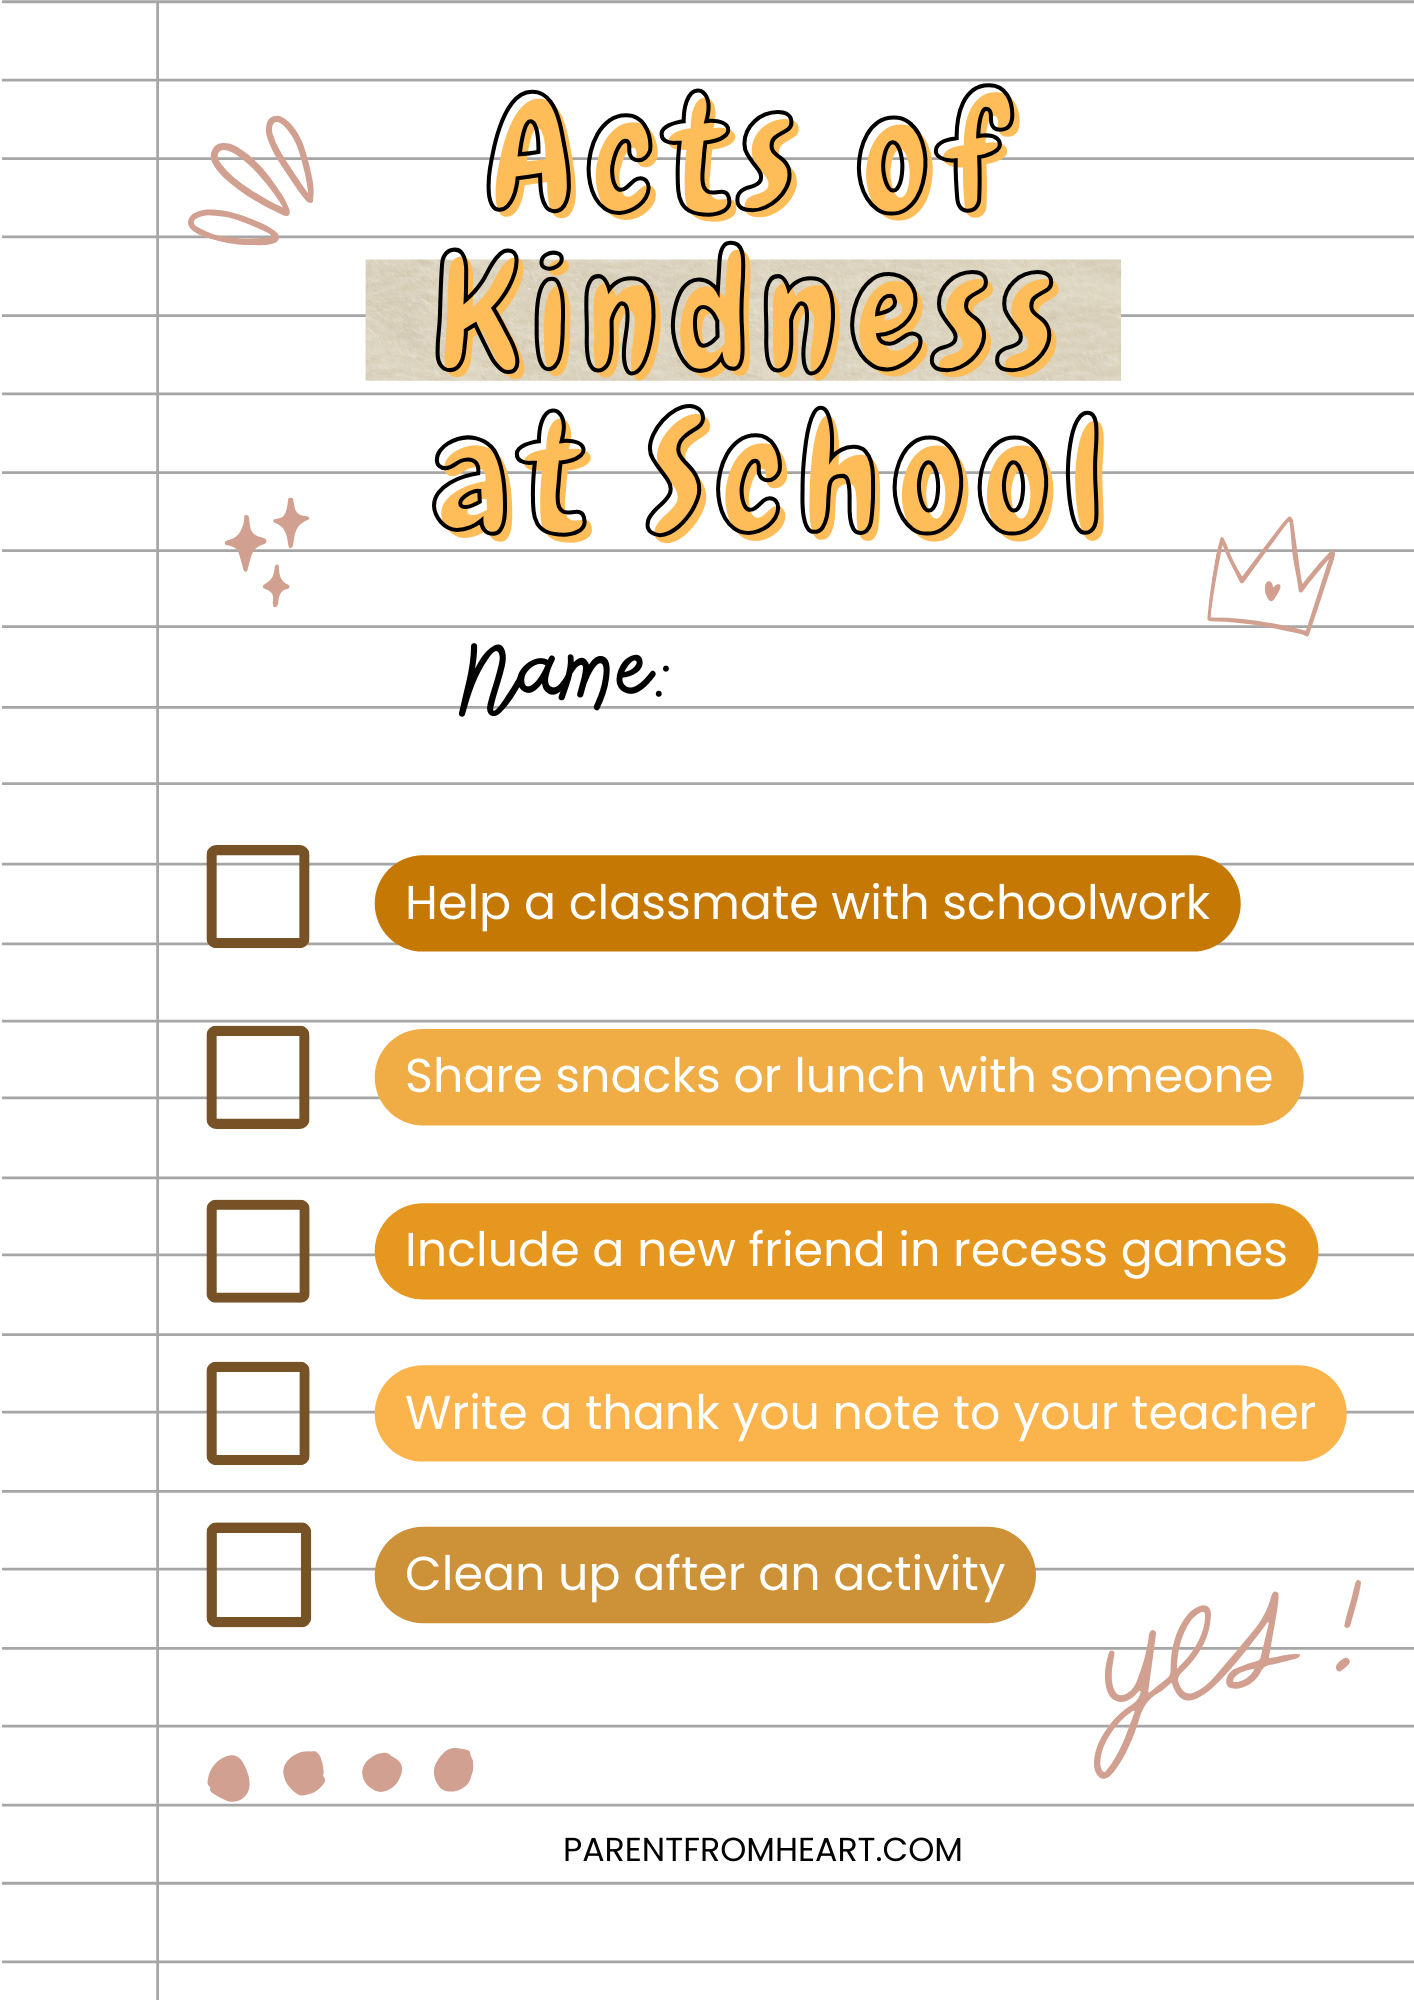 A checklist for kids: Acts of Kindness at School.